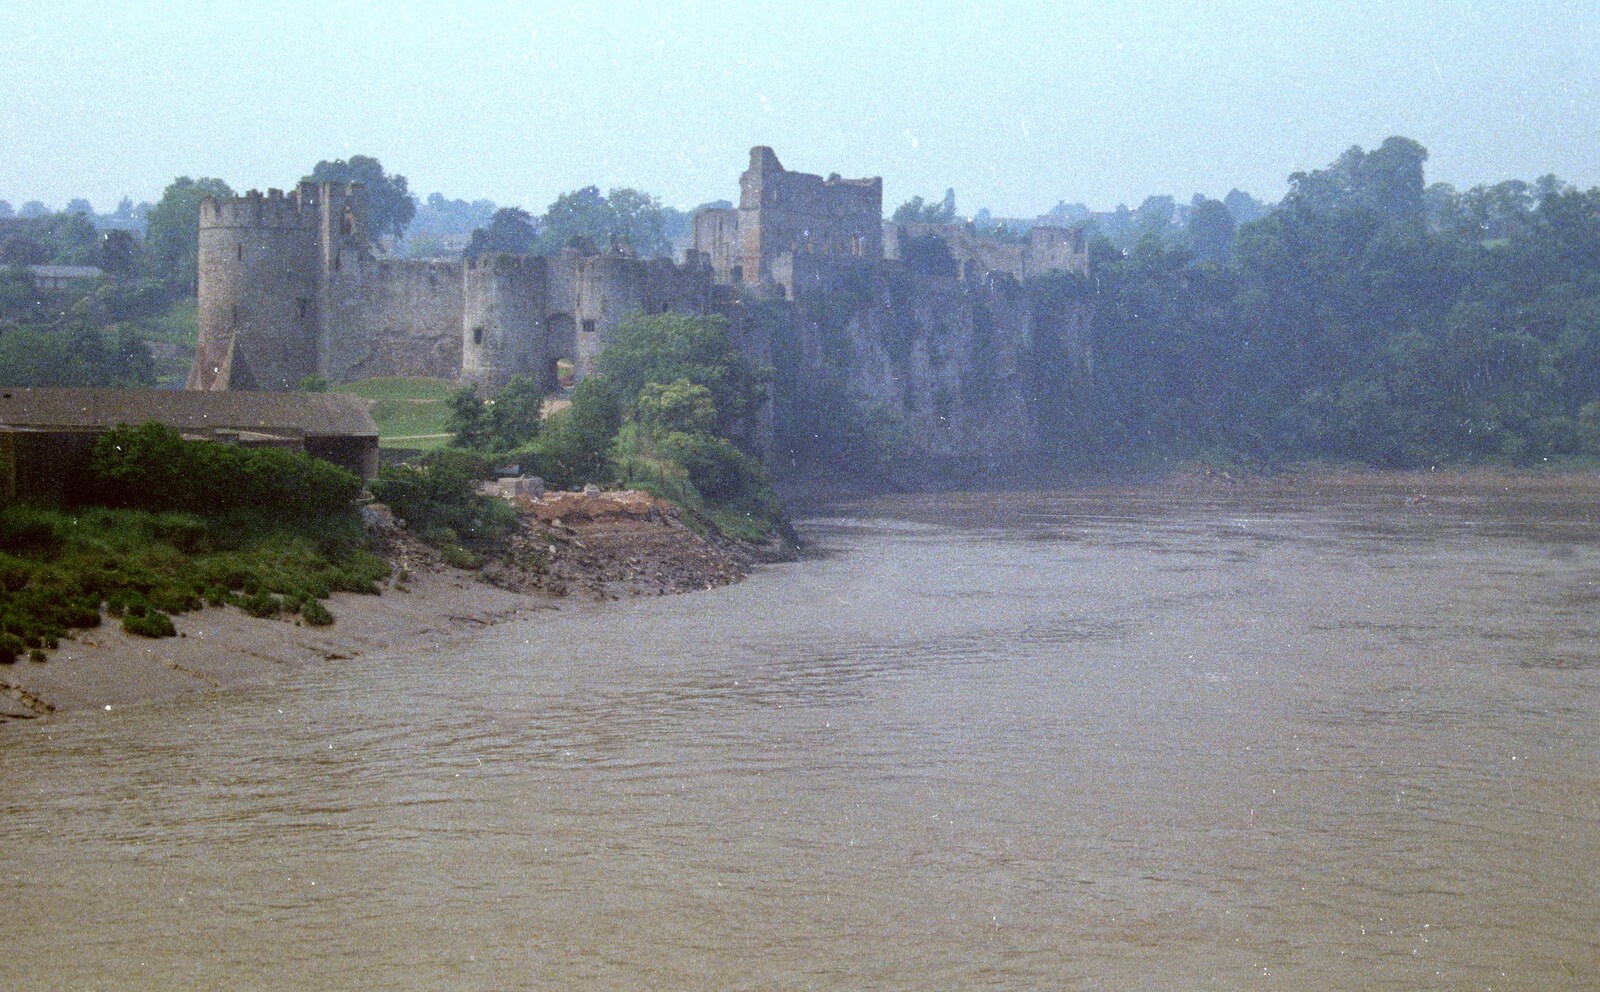 Chepstow Castle and the River Wye from A Trip to Chepstow, Monmouthshire, Wales - 5th July 1986